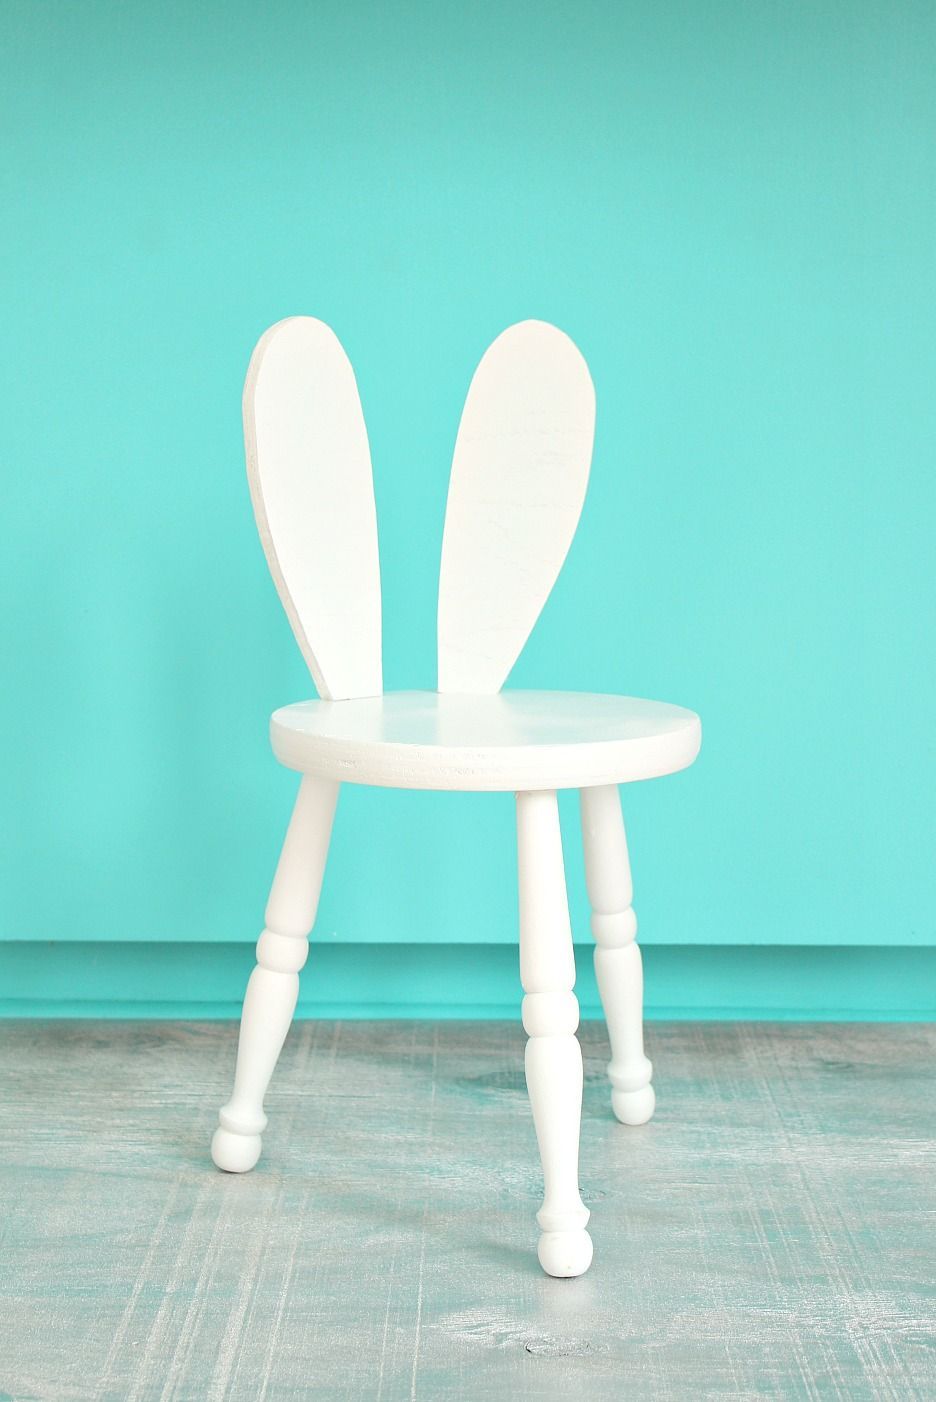 stool with rabbit ears on the back